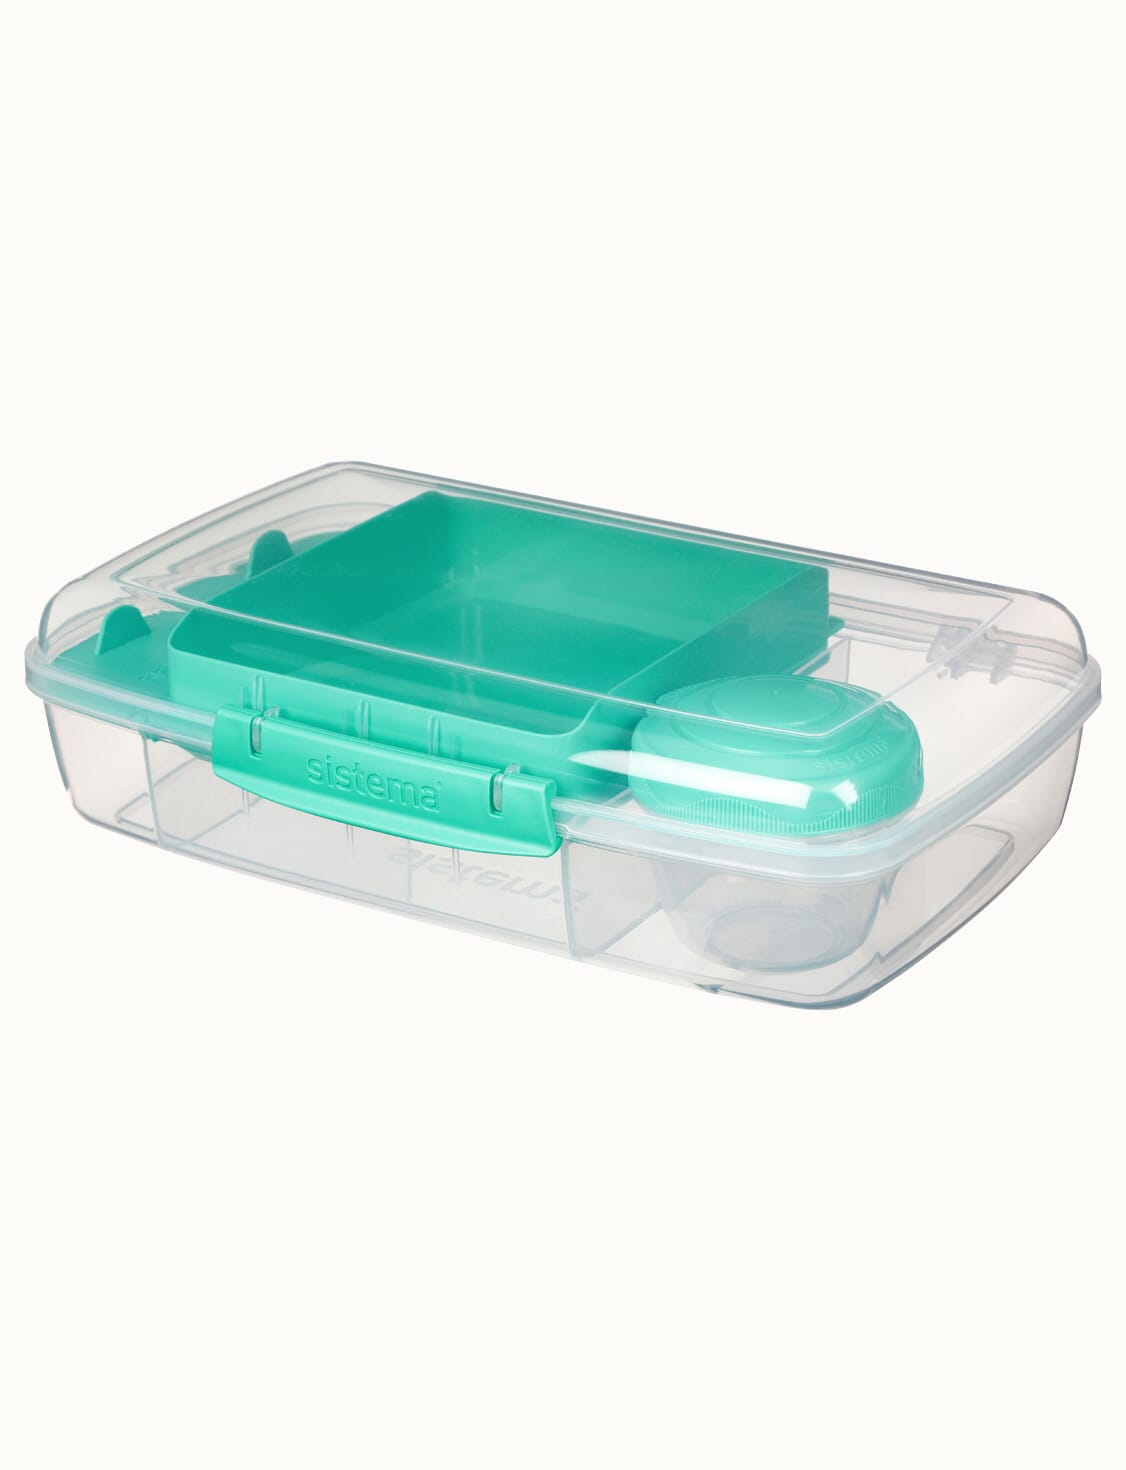  Sistema Bento Box Lunch Box with 3 Compartments, 2